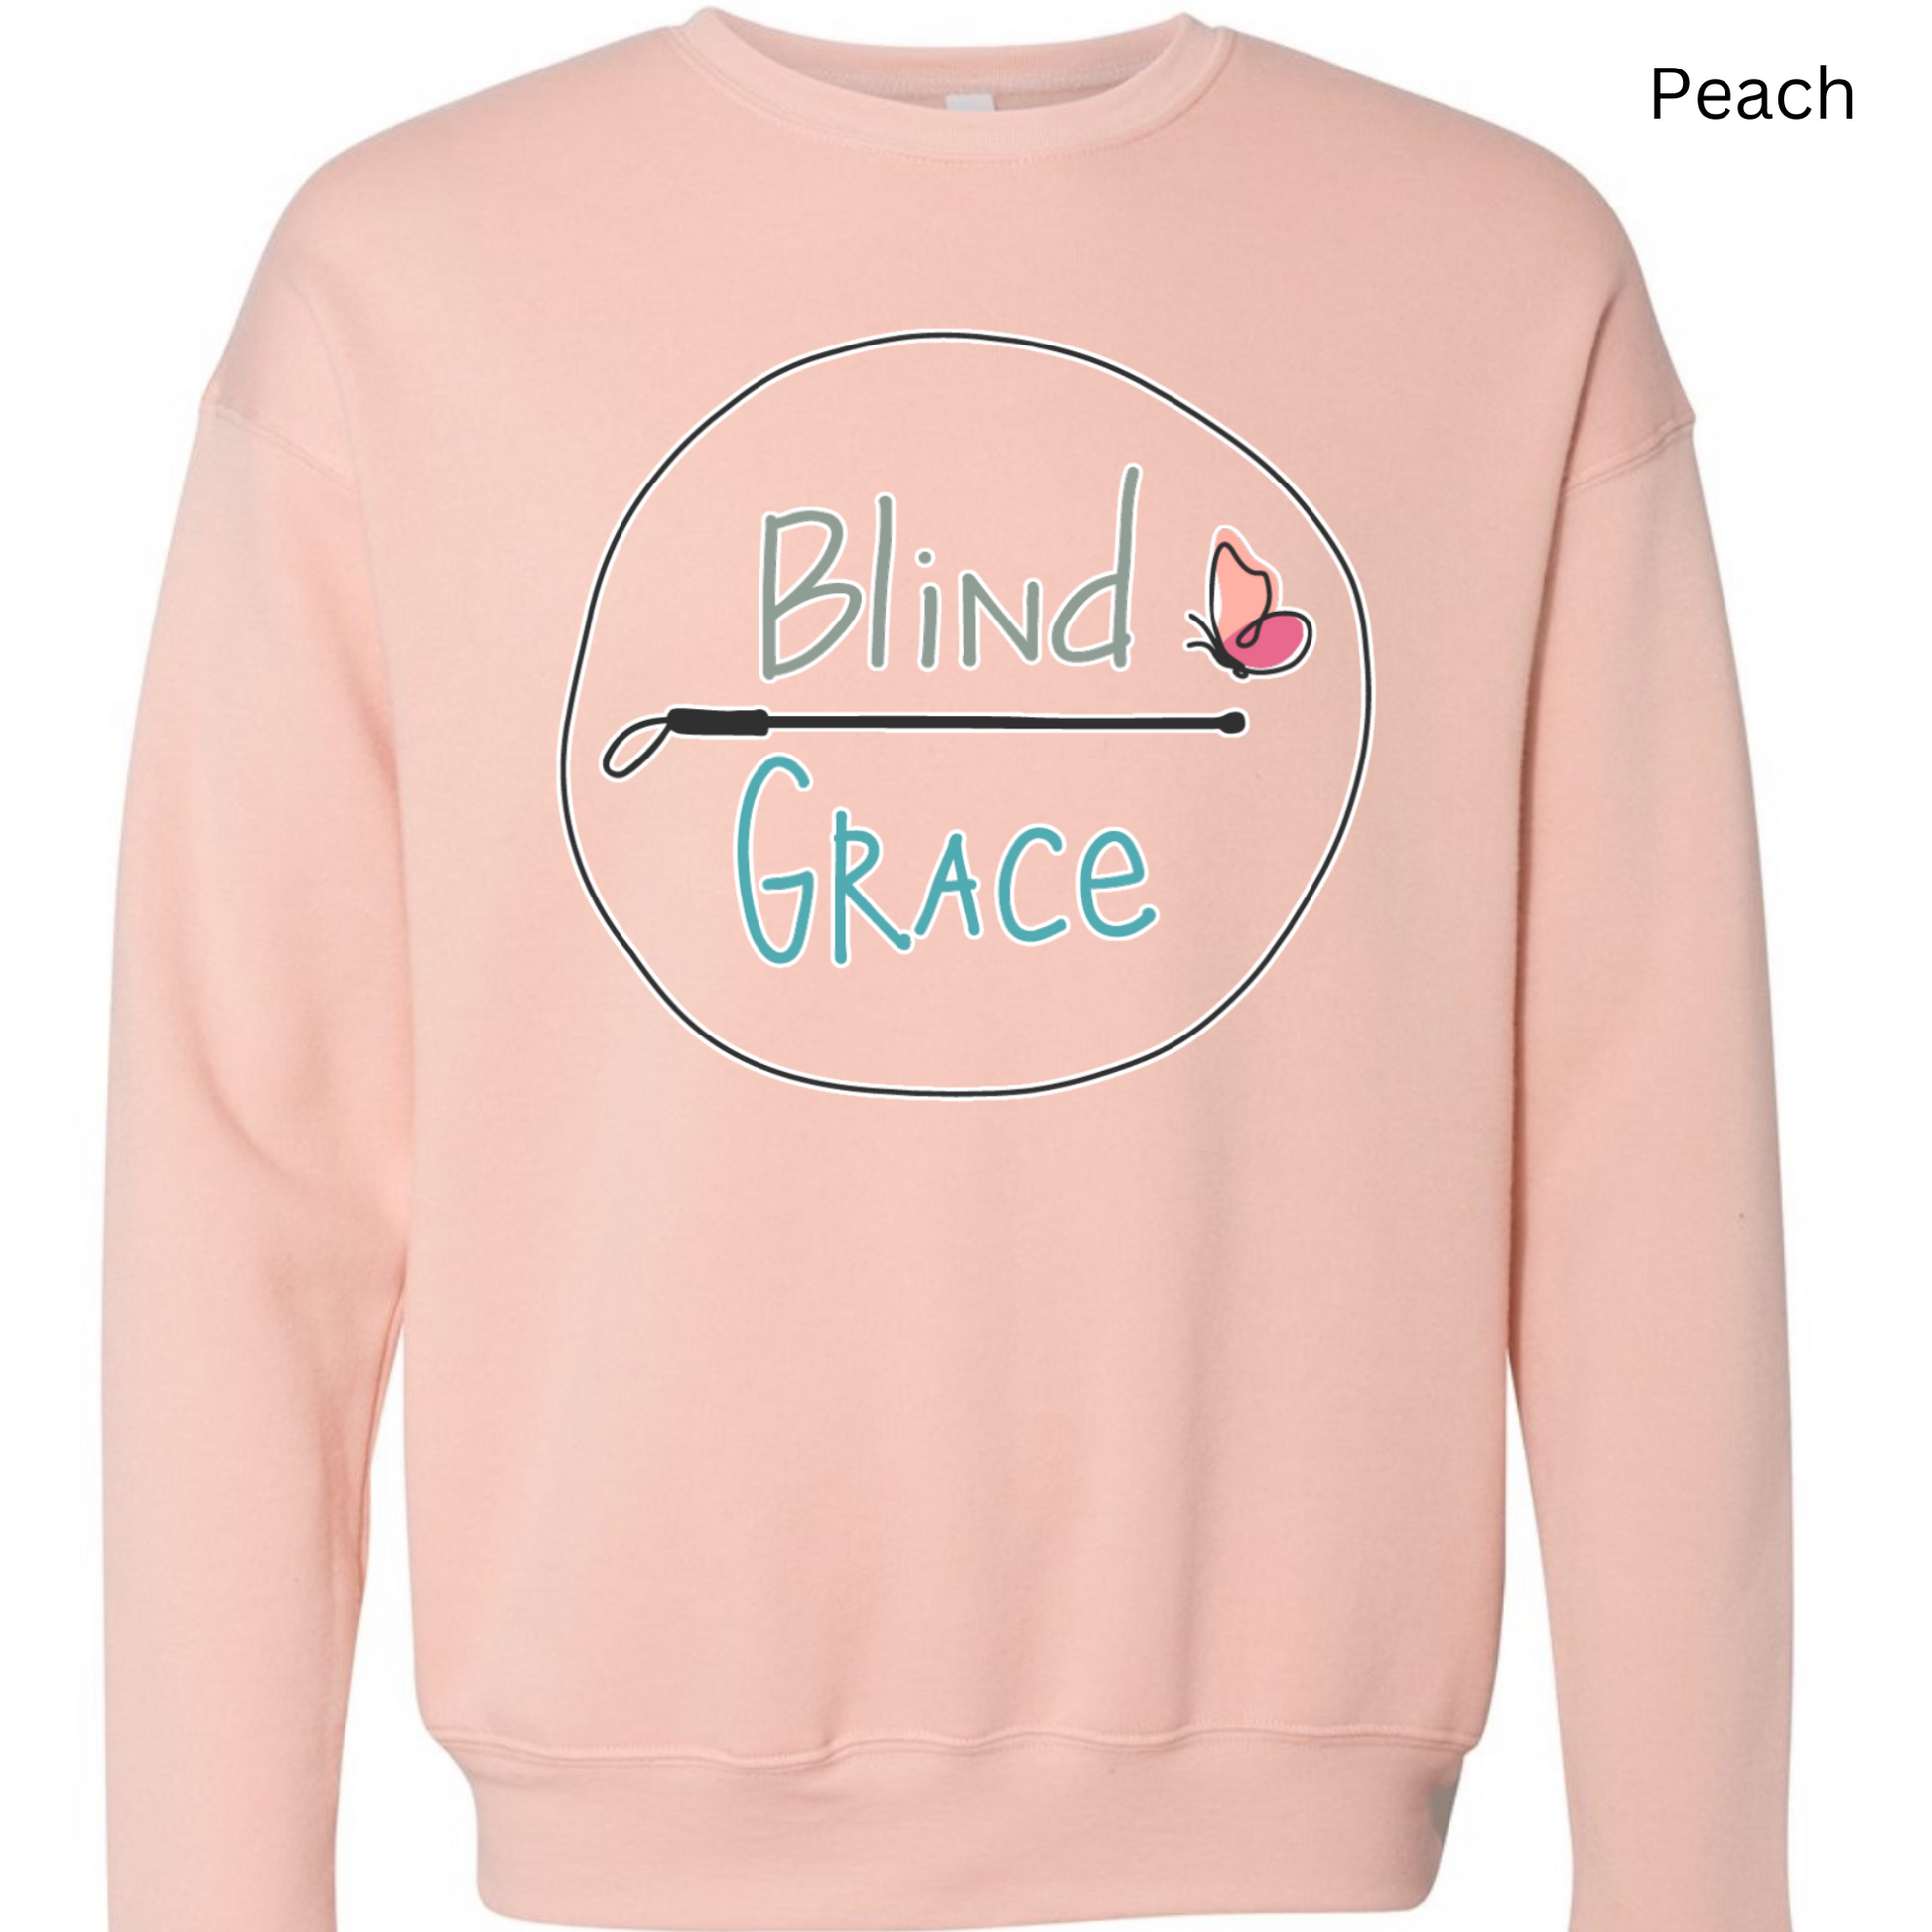 Peach crewneck sweatshirt with the original blind Grace logo (blind in olive green over a cane with Grace in turquoise and a pink and peach butterfly) outlined in white 